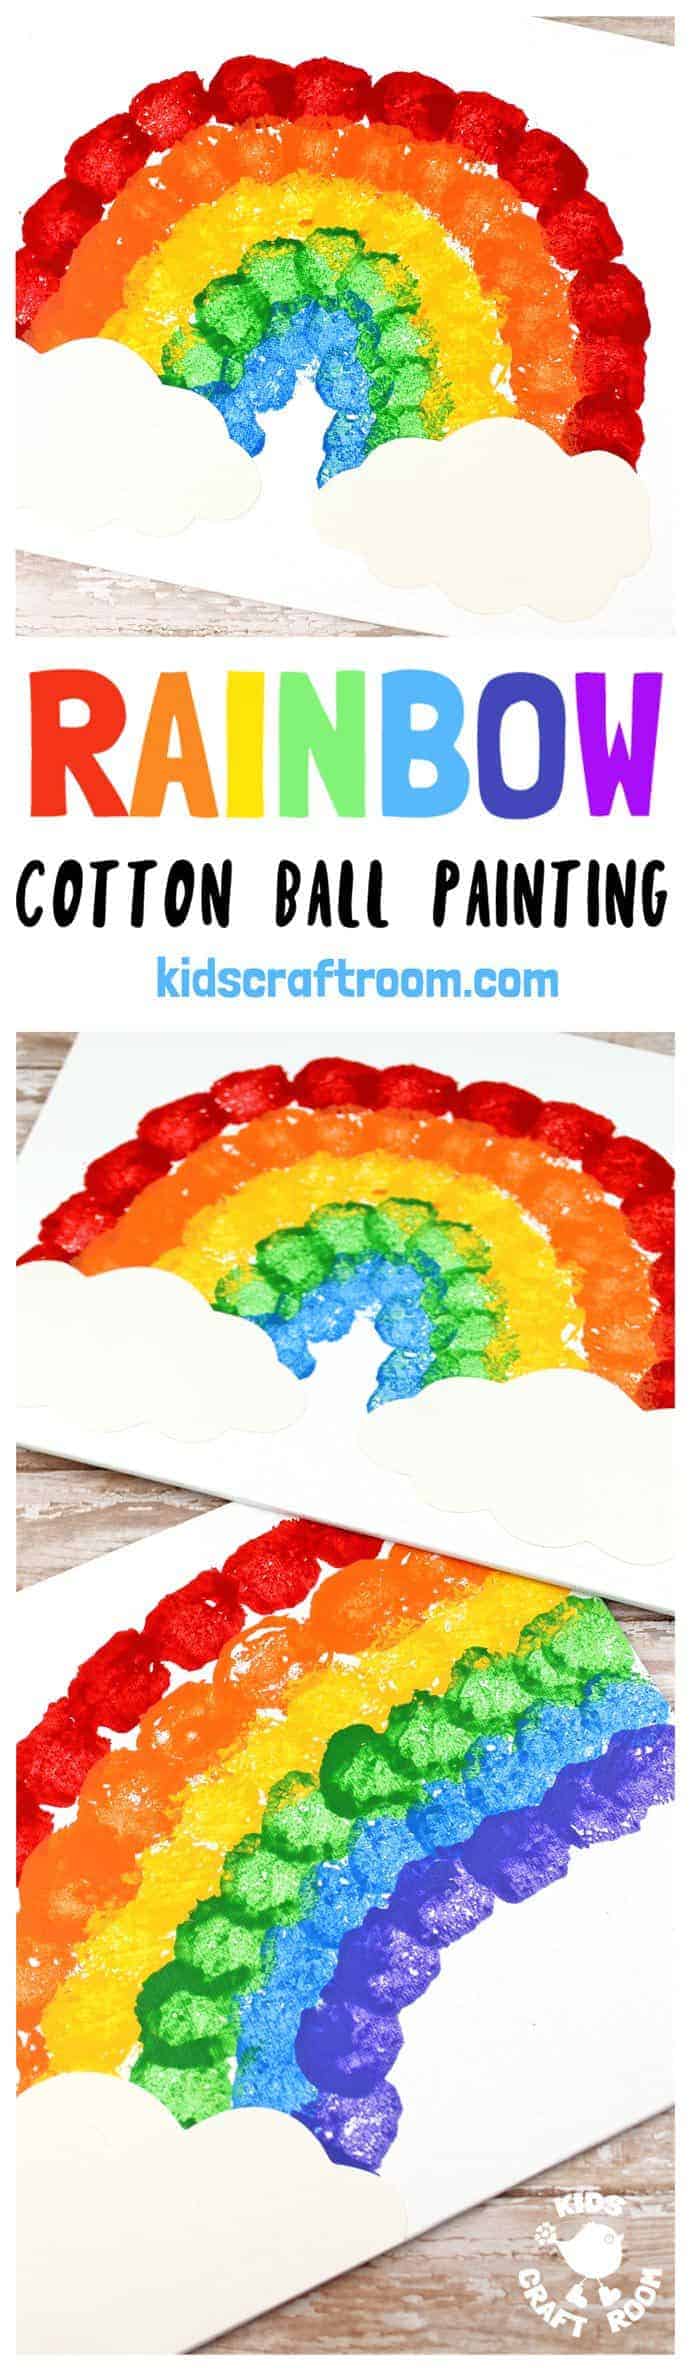 RAINBOW COTTON BALL PAINTING is lots of fun, looks amazing and develops kids motor skills and hand-eye co-ordination. Painting with cotton balls is exciting for kids and a great way to broaden their painting experiences away from just traditional brushes. #rainbow #kidsart #kidspaintingideas #stpatricksday #stpaddys #rainbowcrafts #kidspainting #springcrafts #springcraftsforkids #kidsactivities #kidscrafts #kidscraftroom #rainbows #cottonballpainting #painting #kids